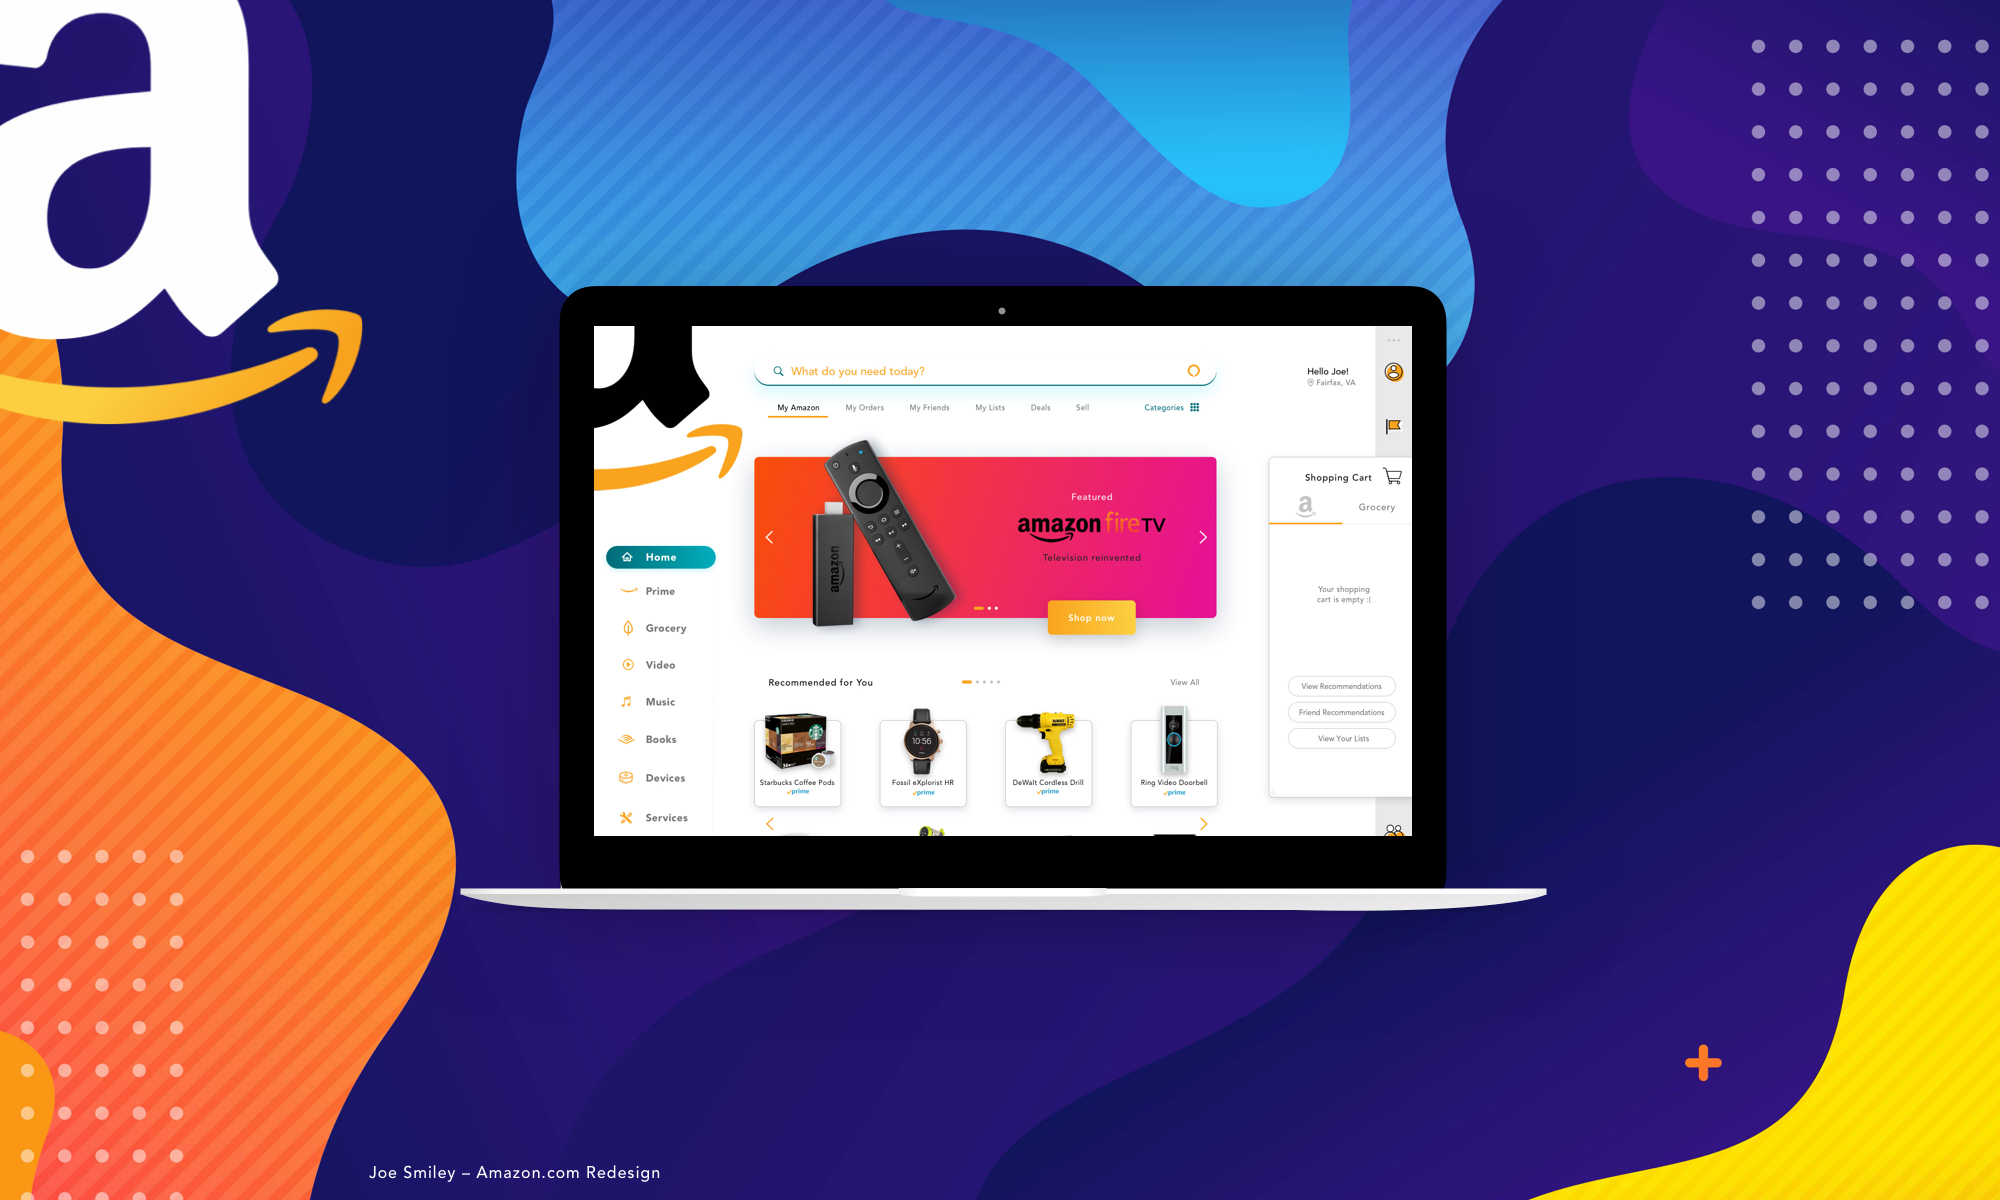 amazon redesigned web experience by Joe Smiley